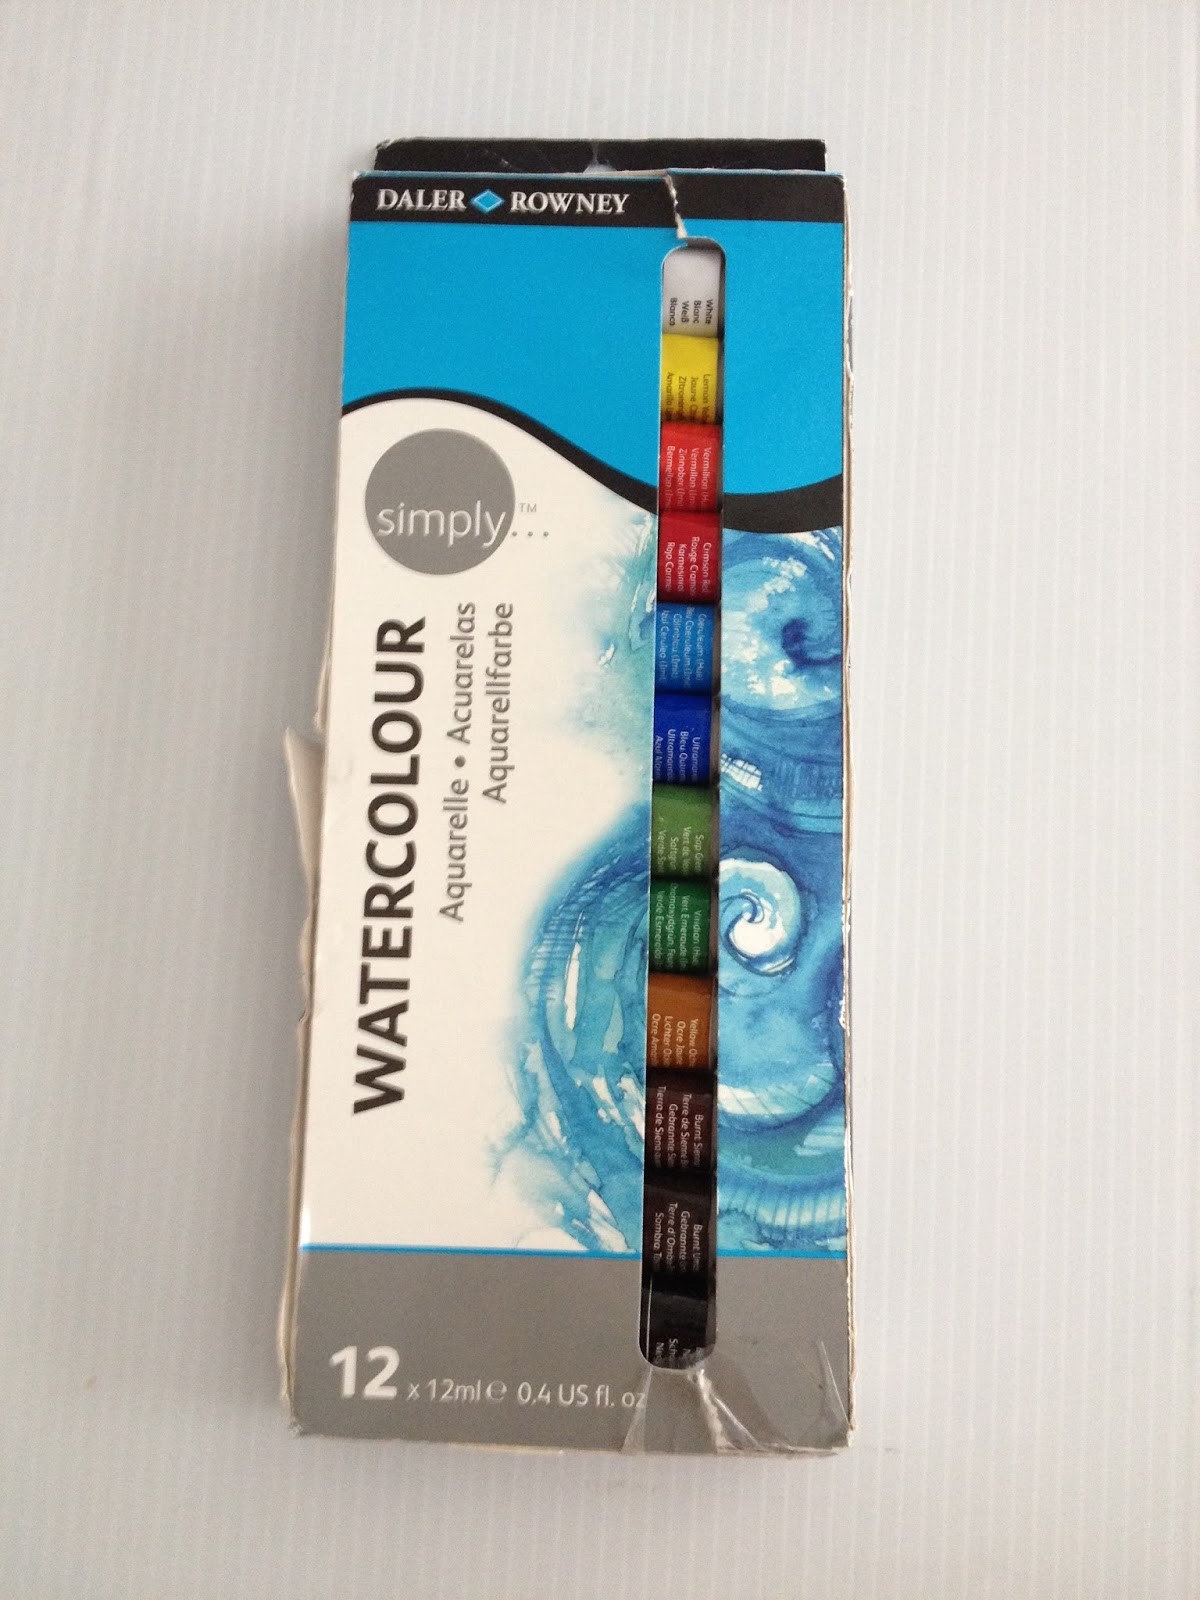 Crayola Watercolor Colored Pencils, 12 Count Use Wet or Dry